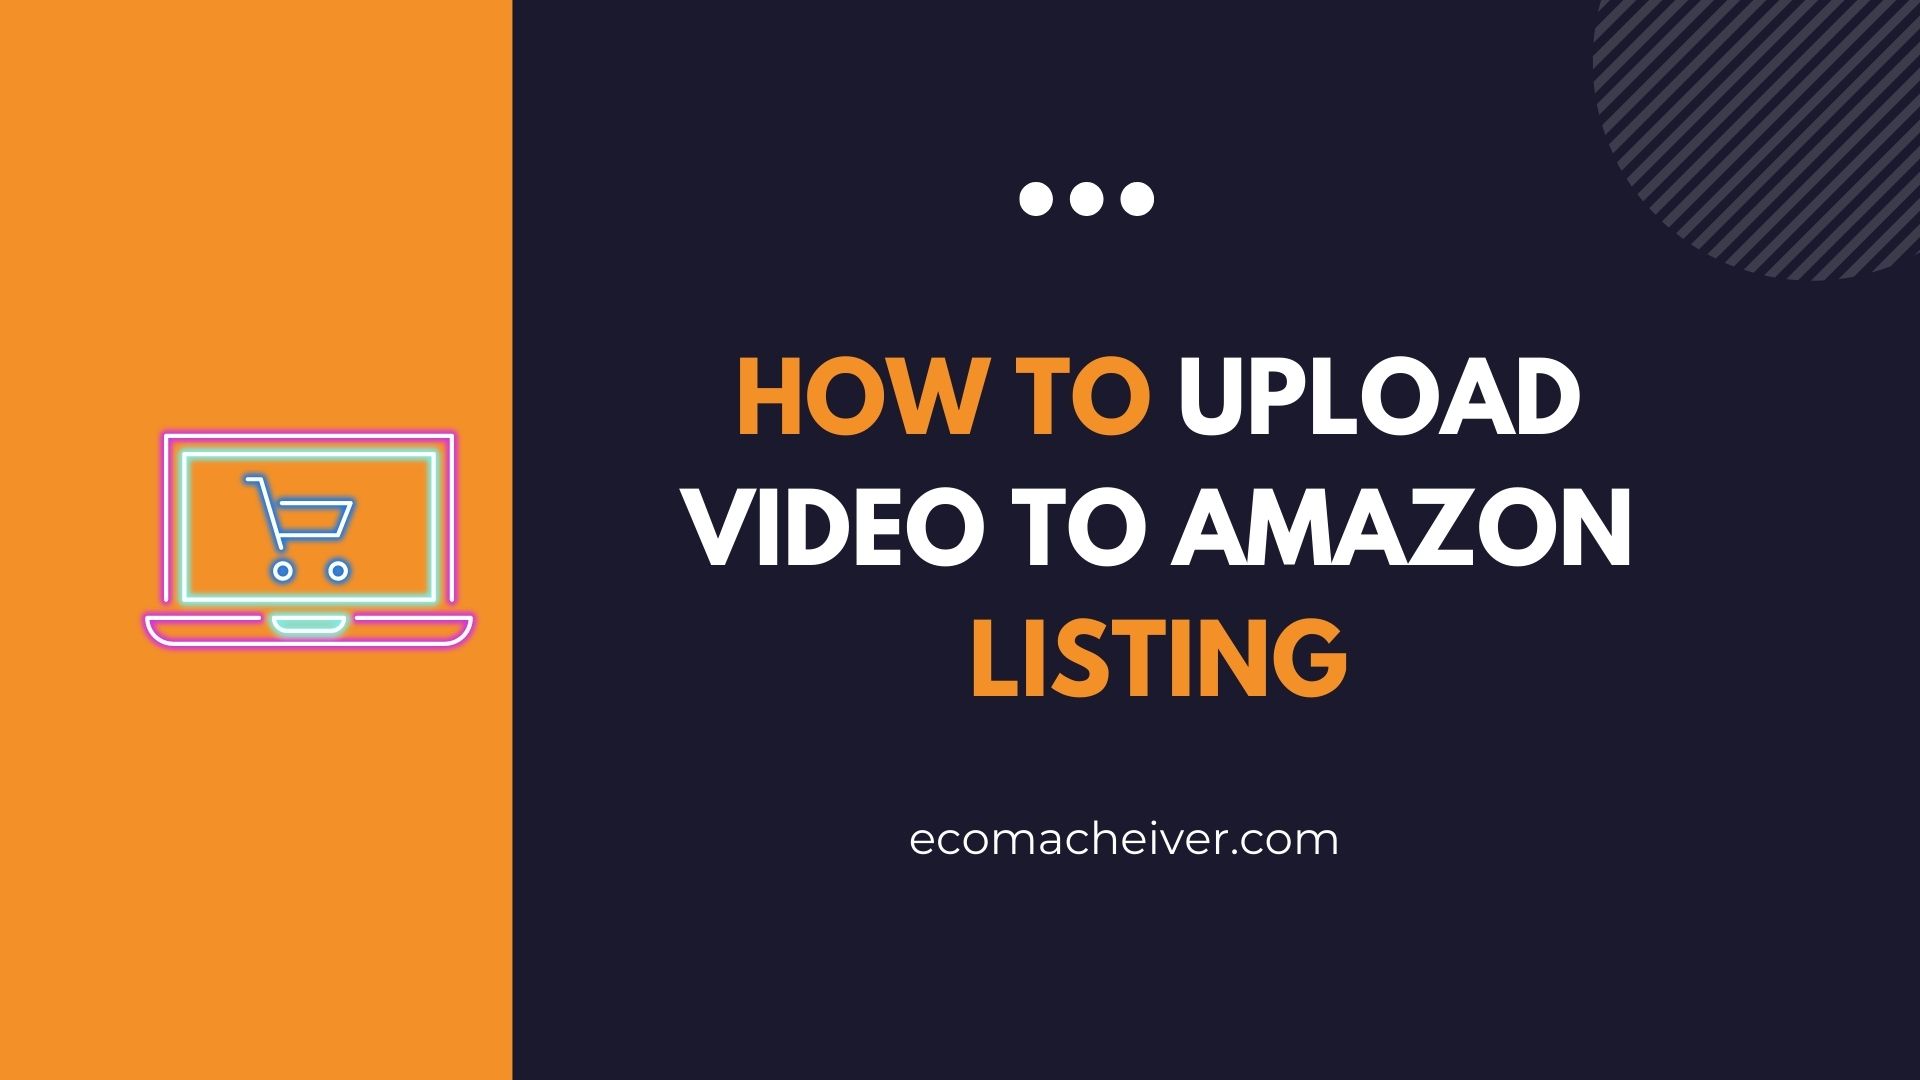 How to Upload Video to Amazon Listing